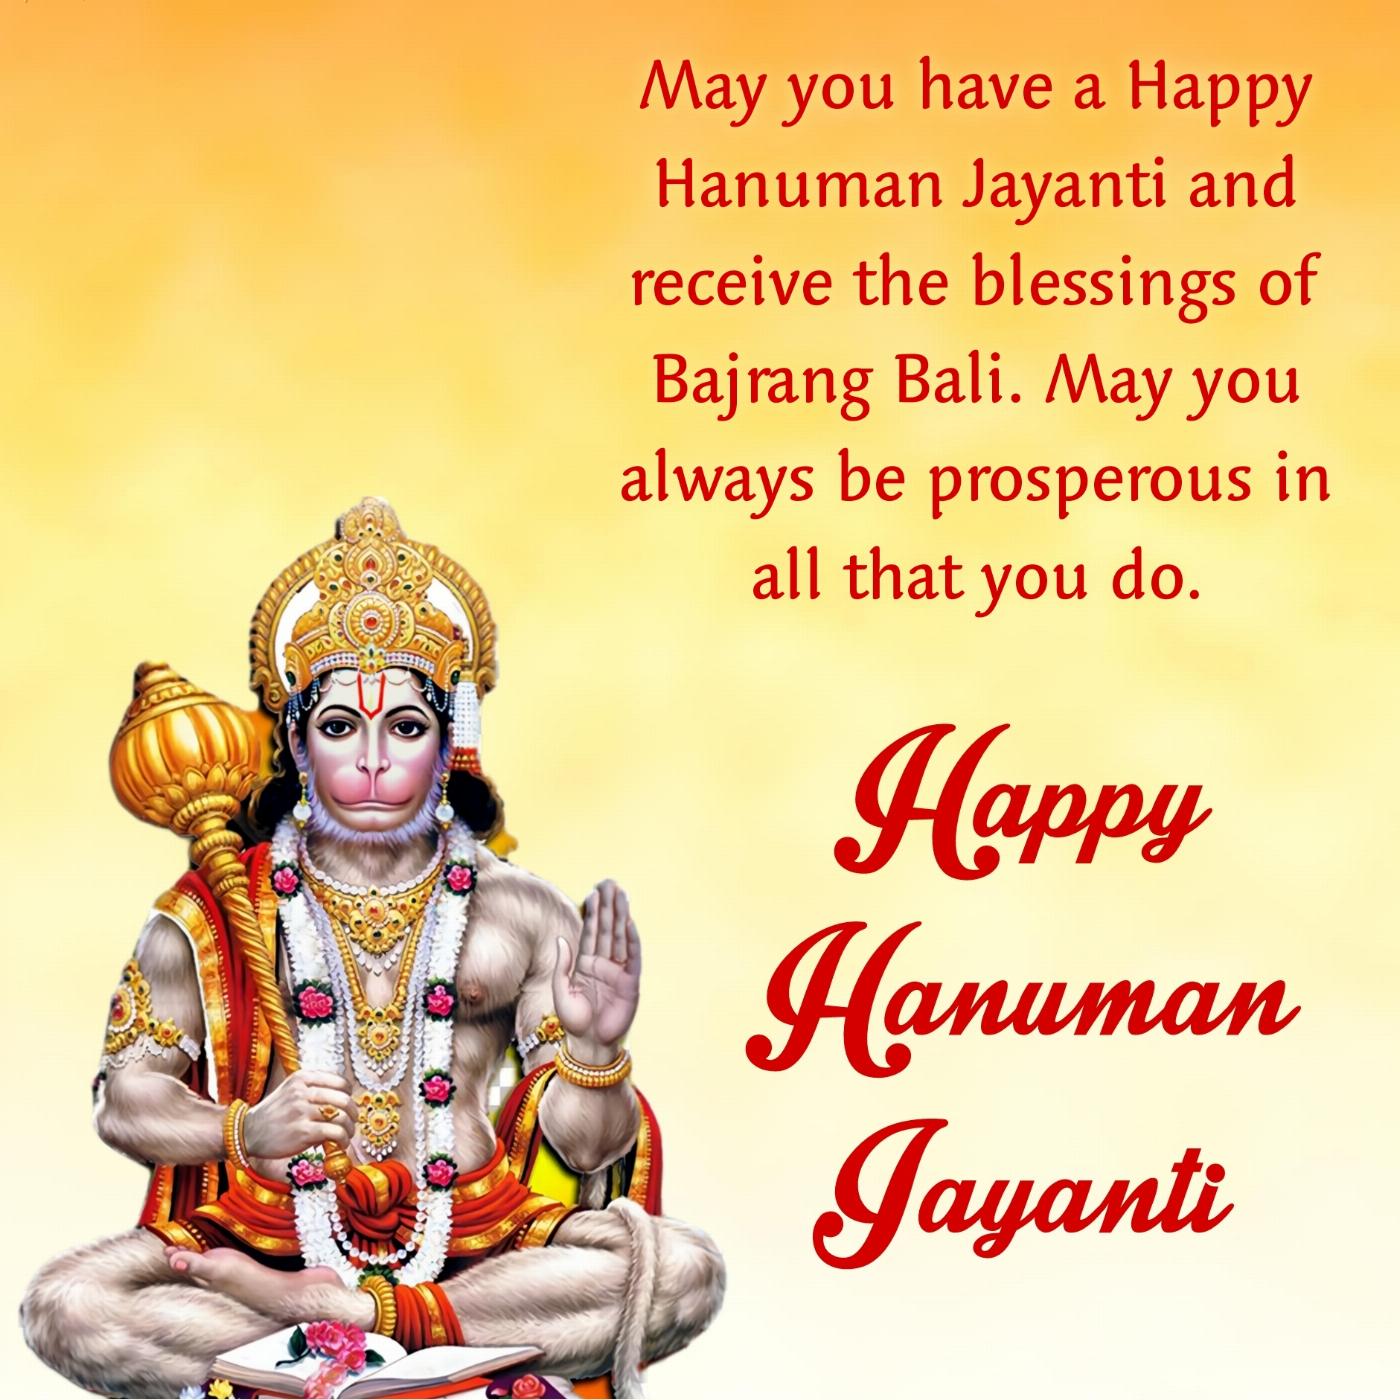 May you have a Happy Hanuman Jayanti and receive the blessings